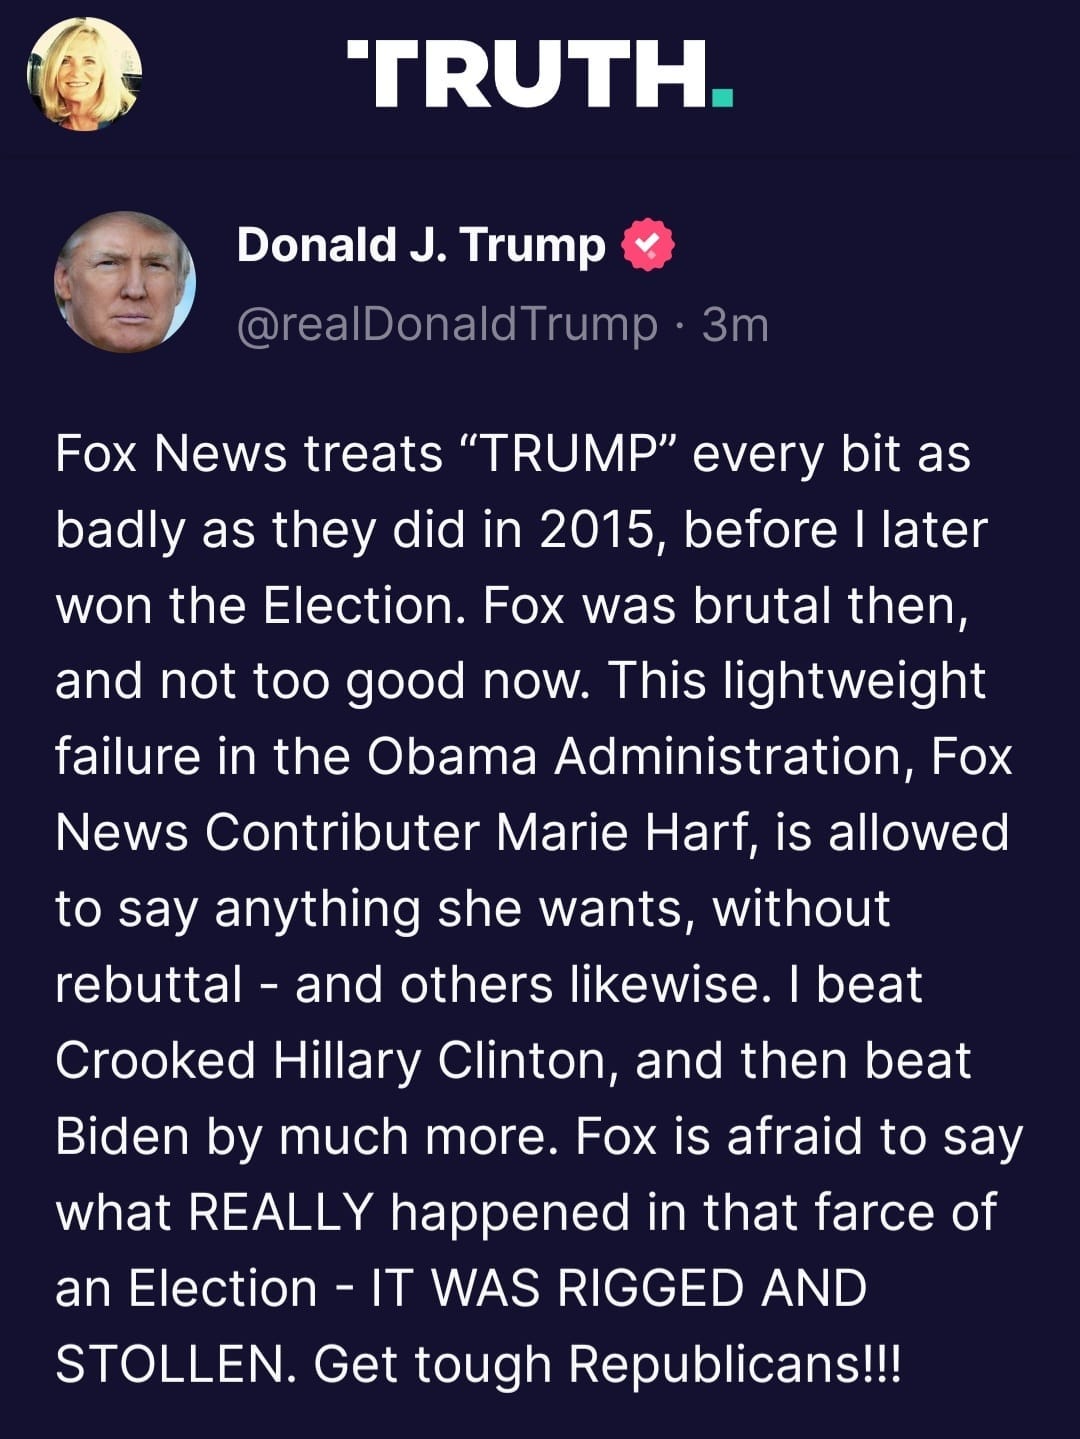 May be an image of 2 people and text that says 'TRUTH. Donald J. Trump @realDonaldTrump 3m Fox News treats "TRUMP" every bit as badly as they did in 2015, before later won the Election. Fox was brutal then, and not too good now. This lightweight failure in the Obama Administration, Fox News Contributer Marie Harf, is allowed to say anything she wants, without rebuttal- and others likewise. beat Crooked Hillary Clinton, and then beat Biden by much more. Fox is afraid to say what REALLY happened in that farce of an Election -IT WAS RIGGED AND STOLLEN. Get tough Republicans!!!'